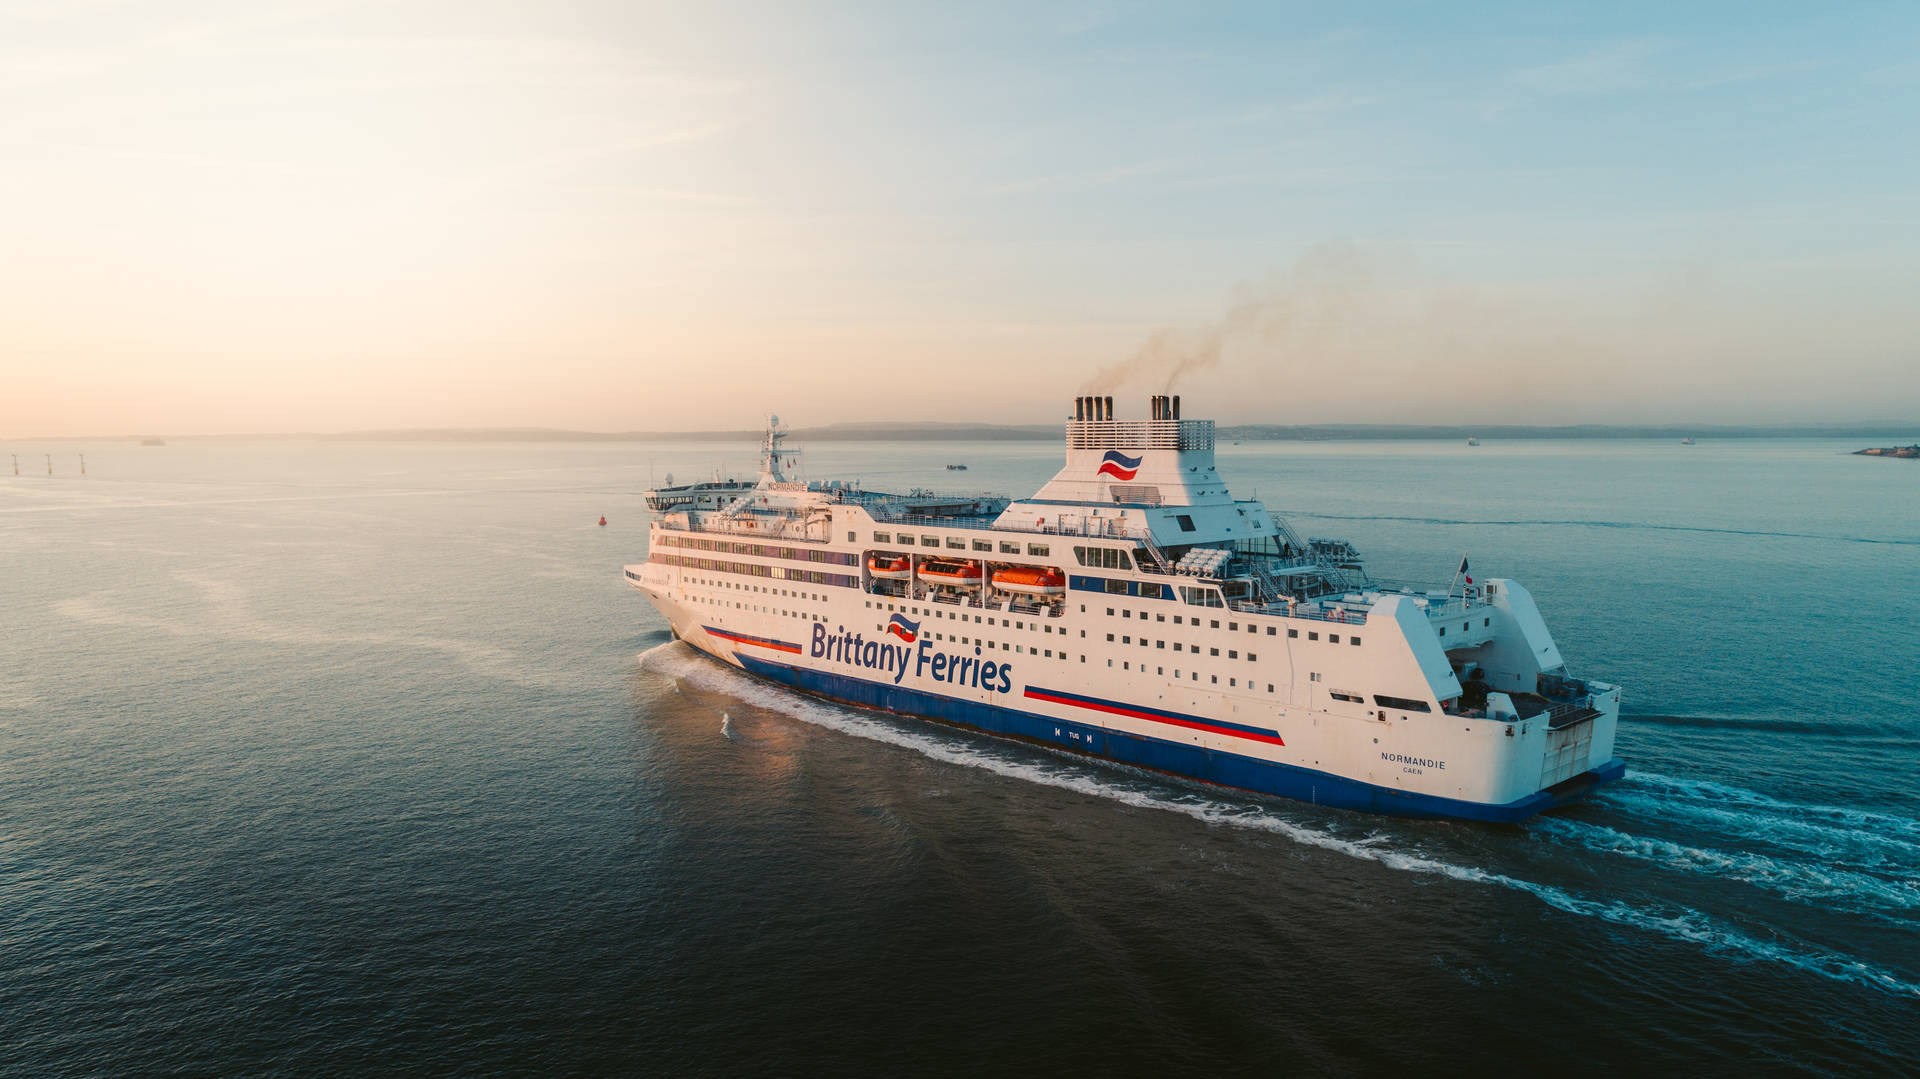 Cruise Ship Brittany Ferries Wallpaper